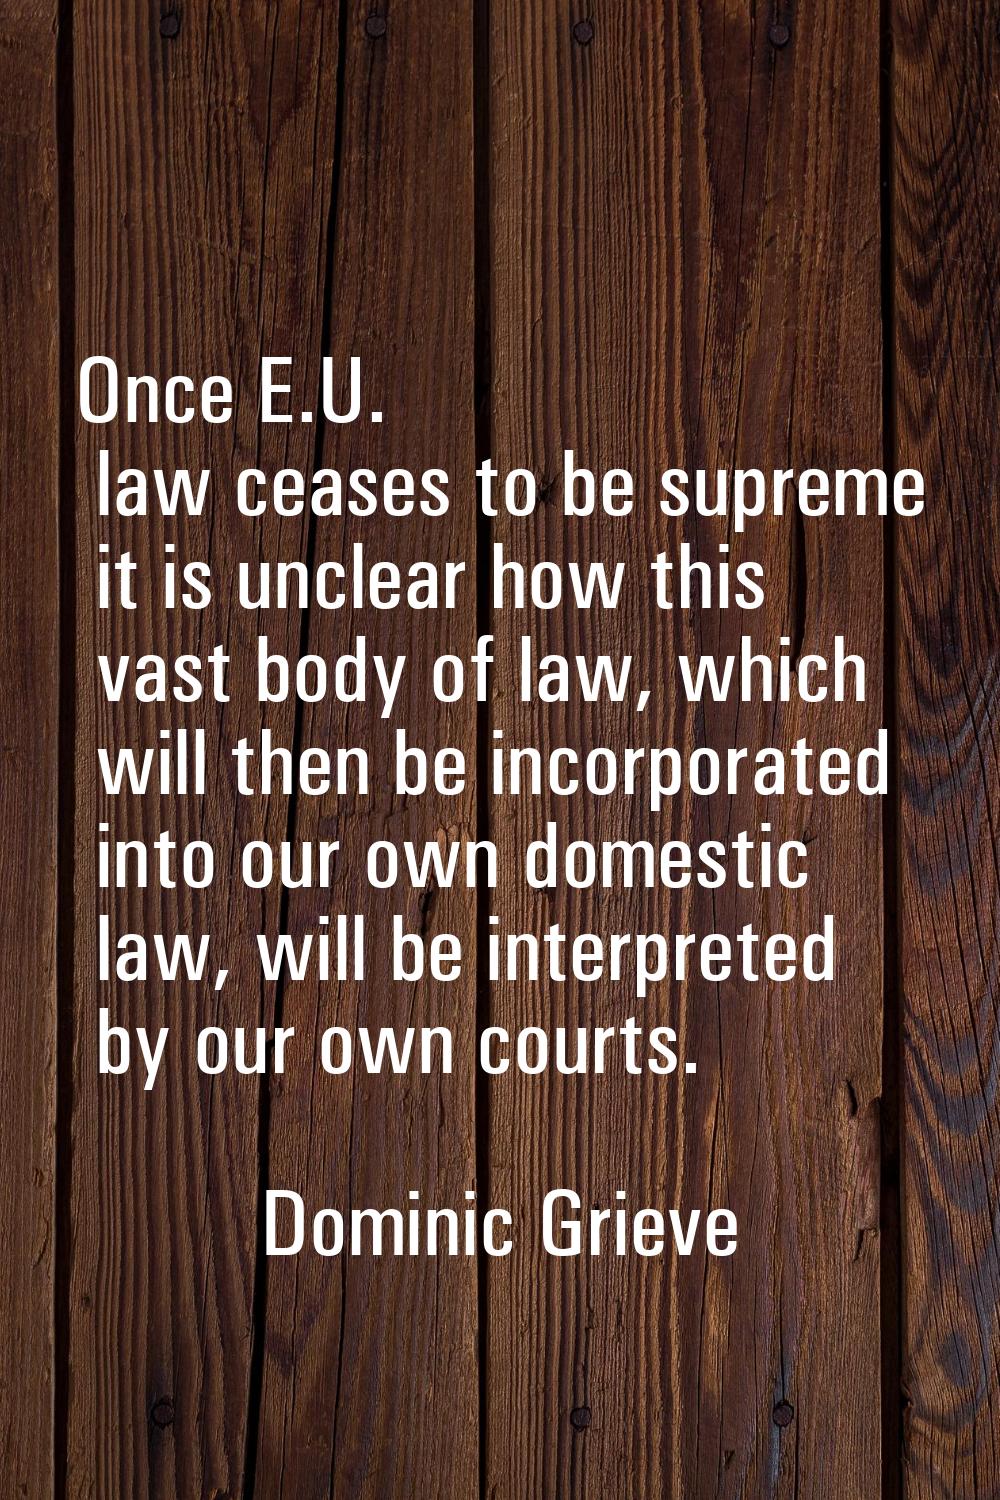 Once E.U. law ceases to be supreme it is unclear how this vast body of law, which will then be inco